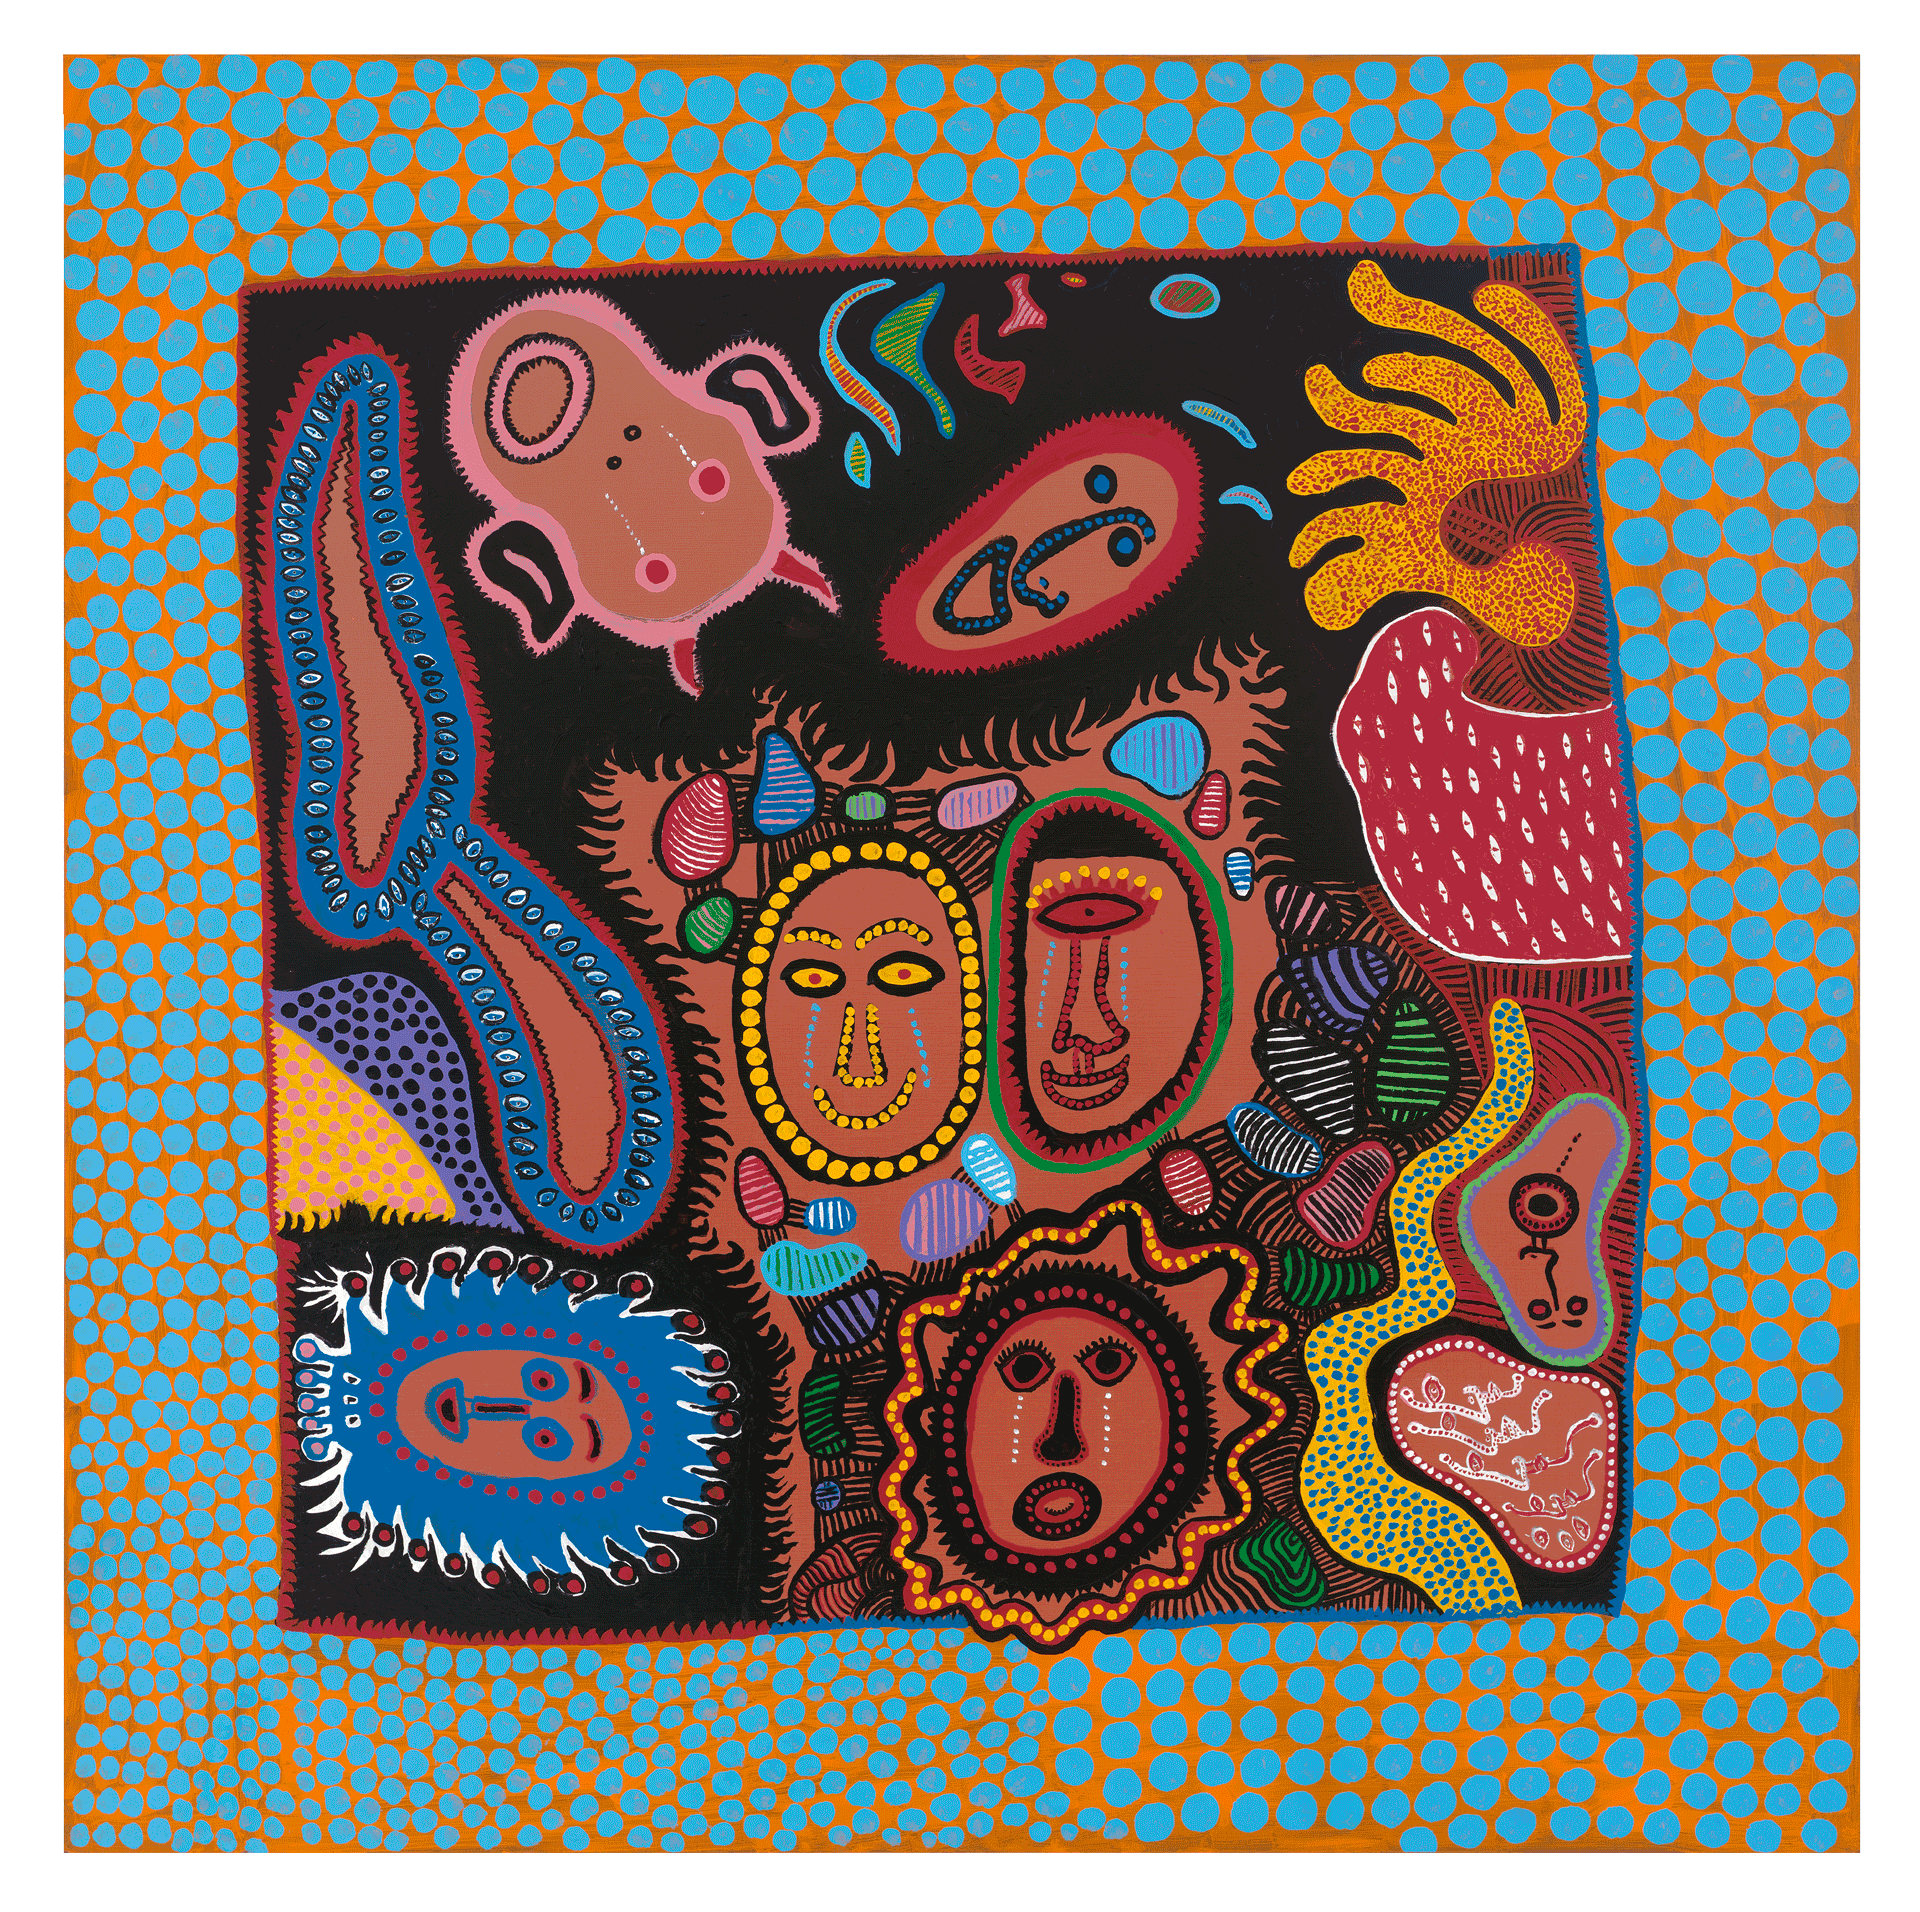 A painting by Yayoi Kusama, titled I WHO CRY IN THE FLOWERING SEASON, dated 2015.